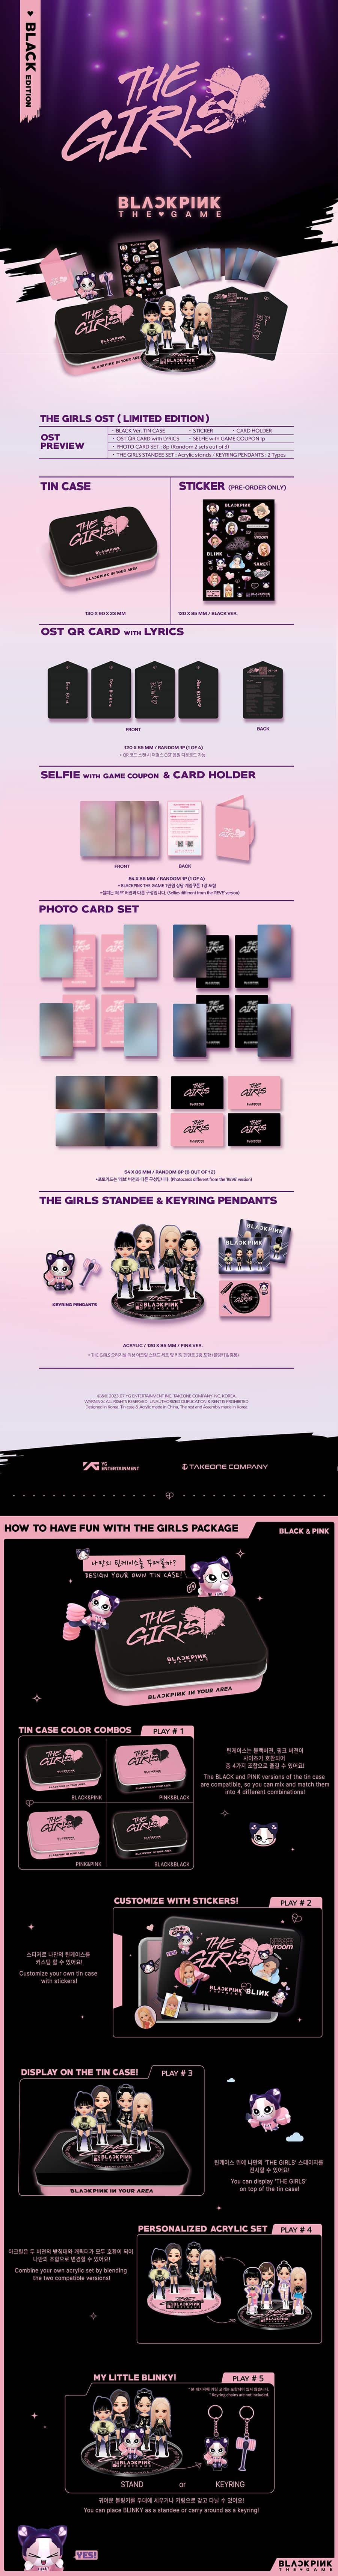 blackpink-the-game-ost-the-girls-stella-ver-limited-edition-black-ver-wholesales